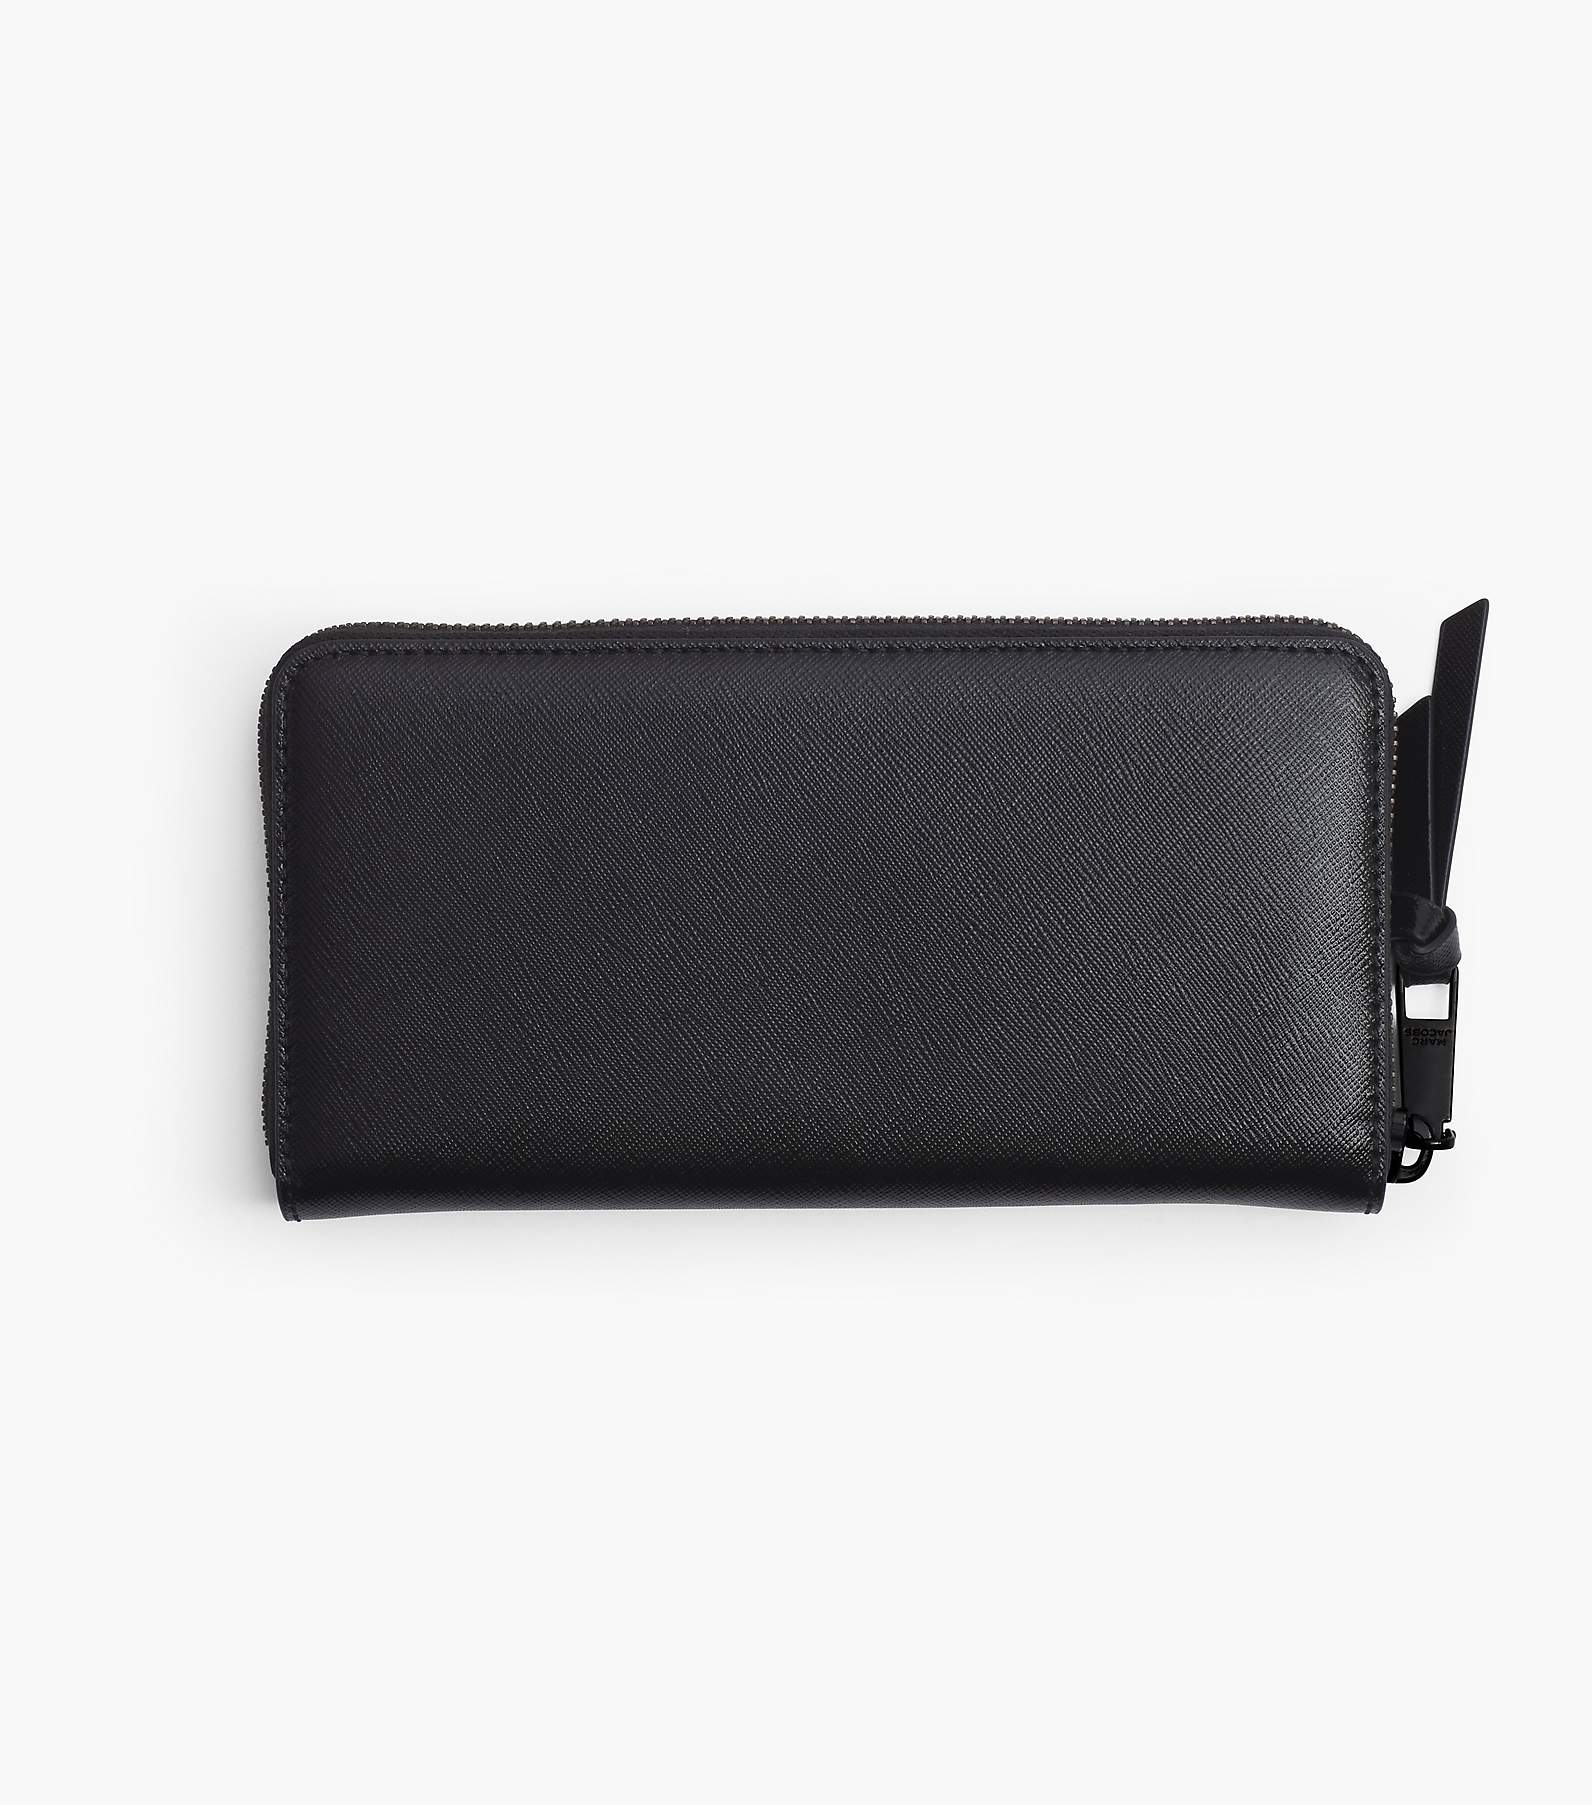 Marc Jacobs The Continental Wallet